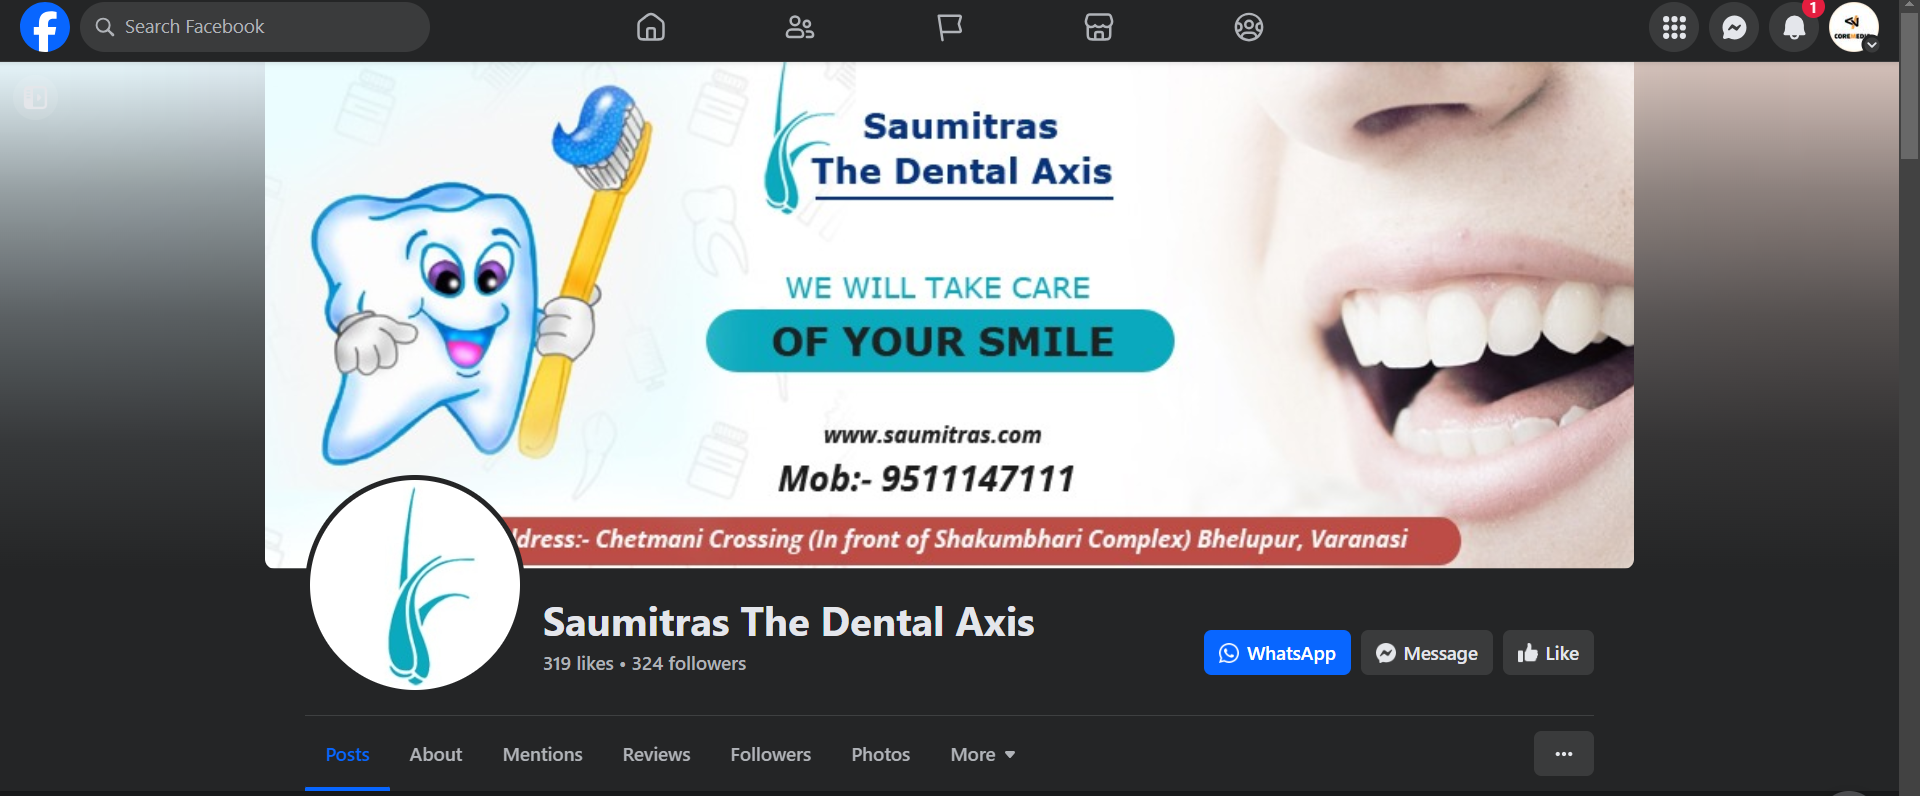 Saumitras The Dental Axis